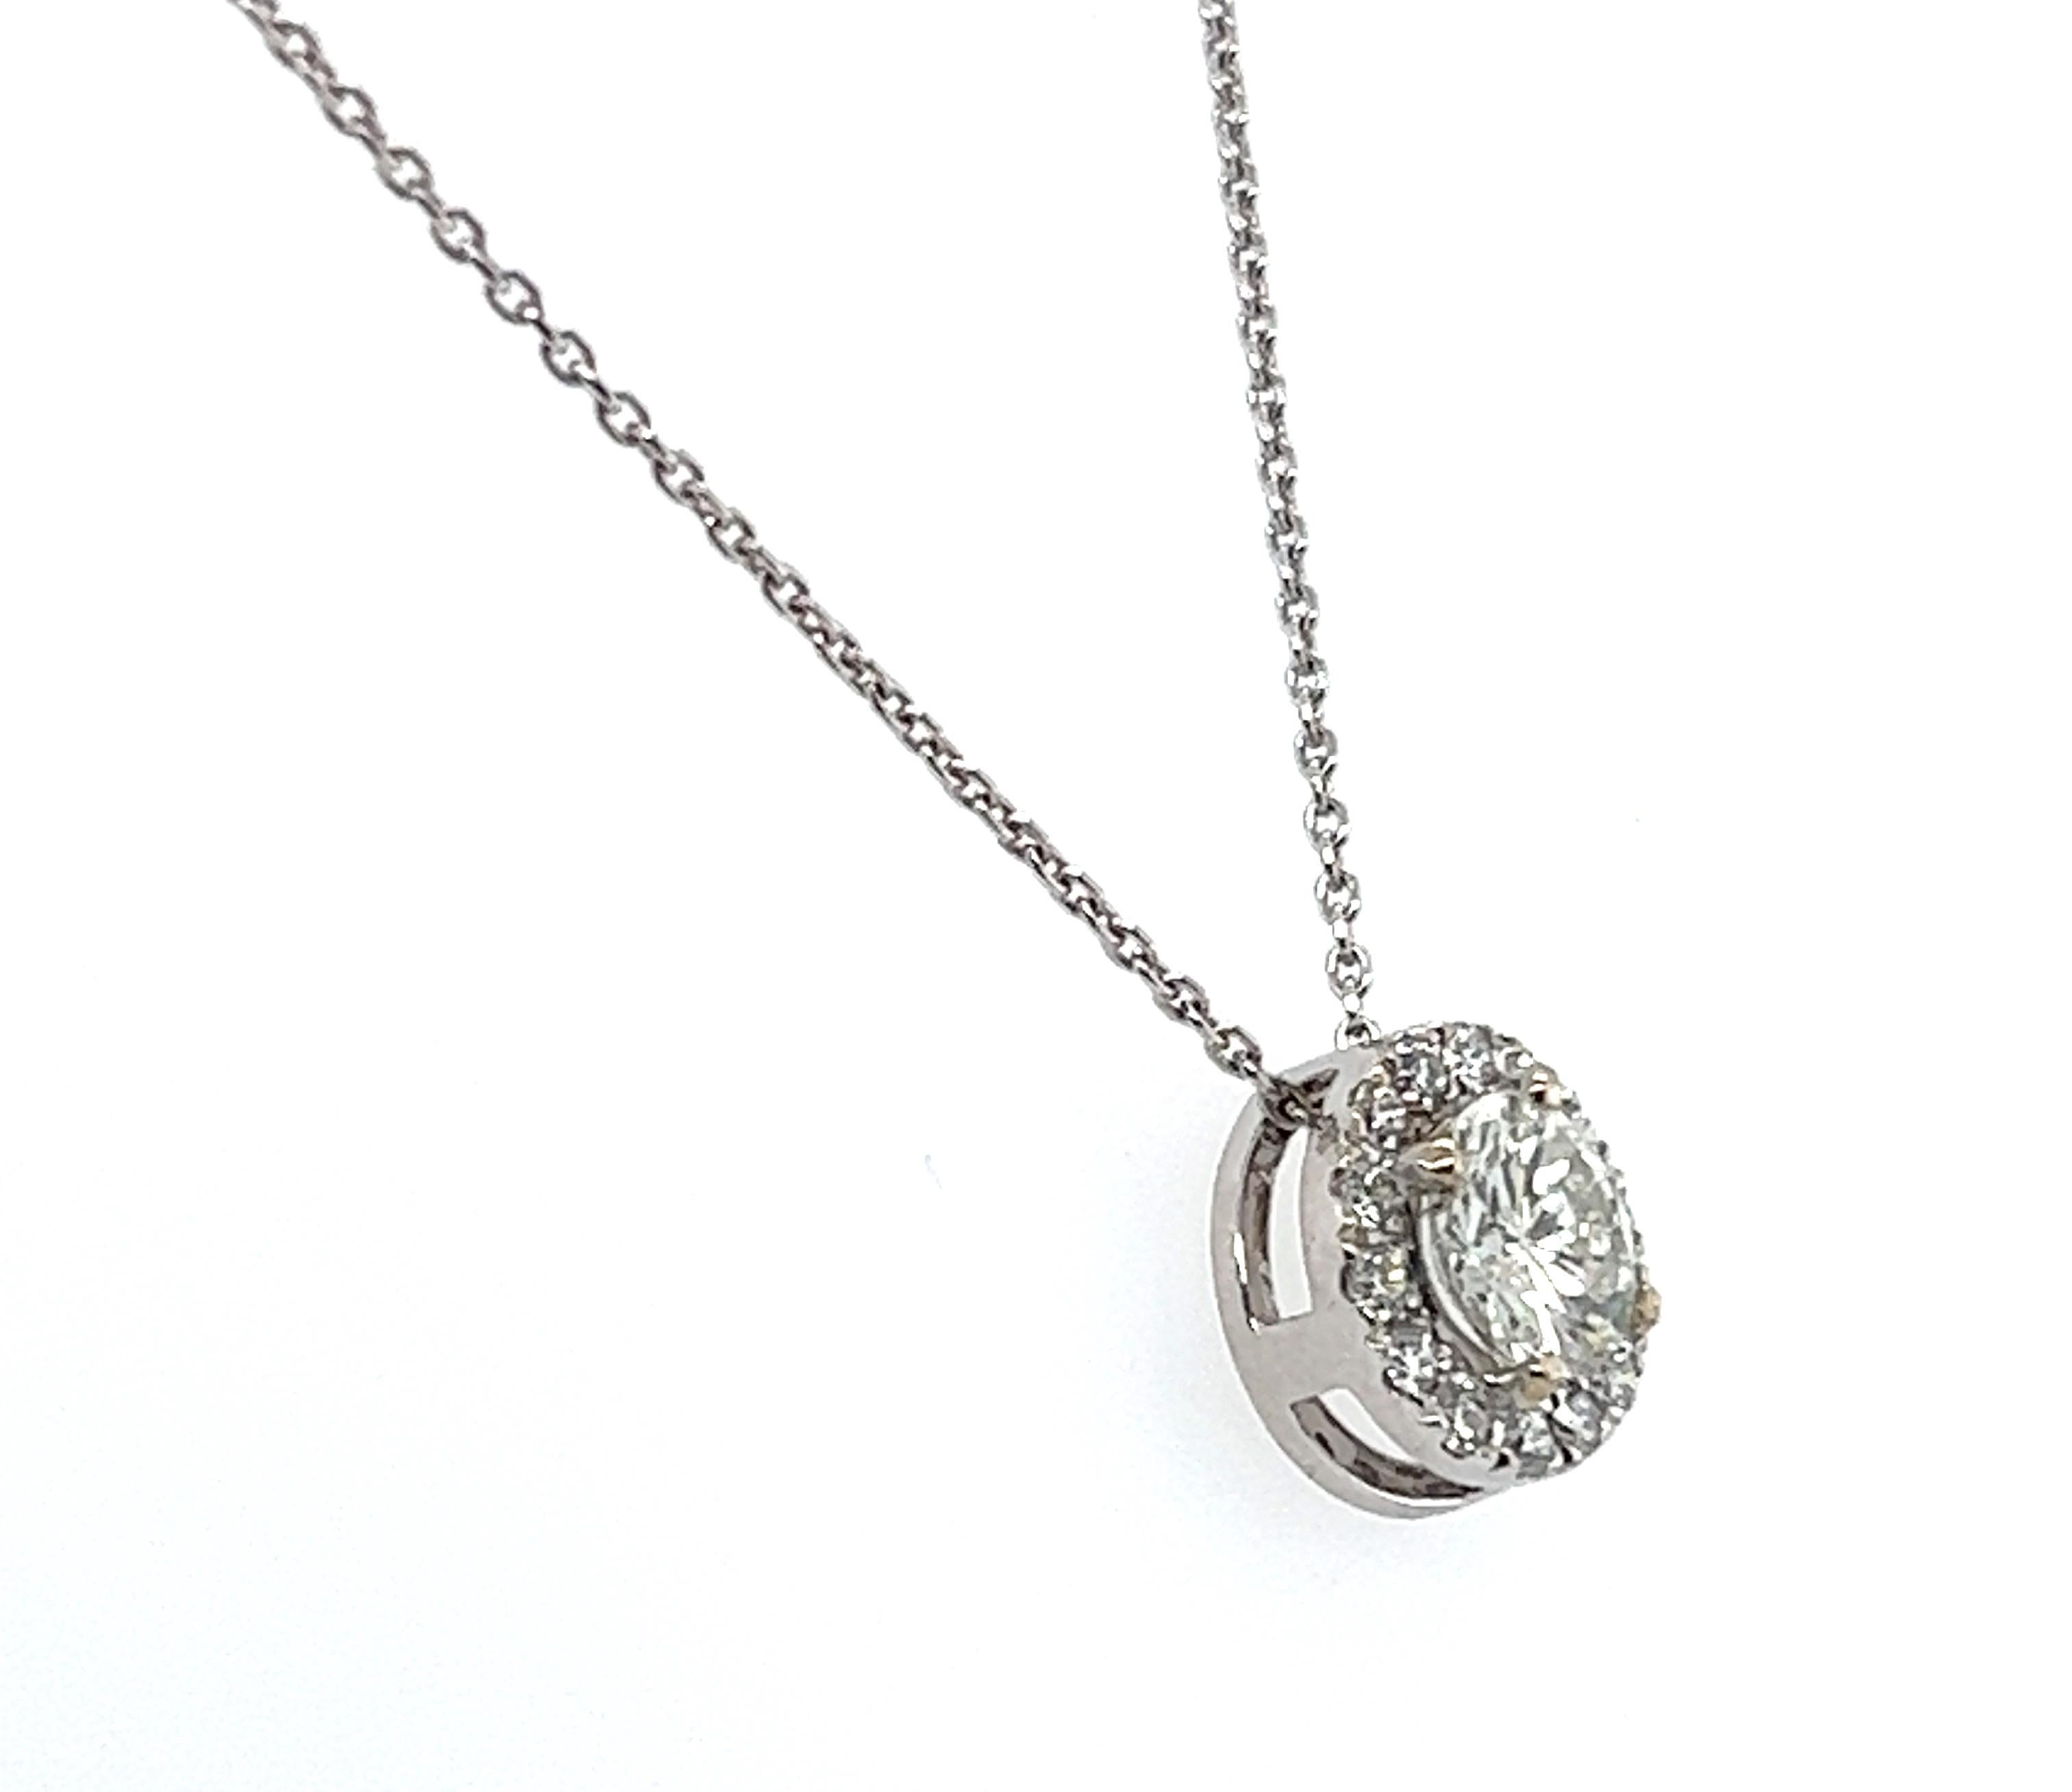 Genuine GIA Certified Diamond Halo Pendant .75ct Round Brilliant GIA 14K BRAND NEW


Featuring a Genuine .59ct Natural Round Brilliant Cut GIA Certified Center Diamond

Gorgeous Round Brilliant Diamond Encompassed by a Glittering Halo of Diamonds